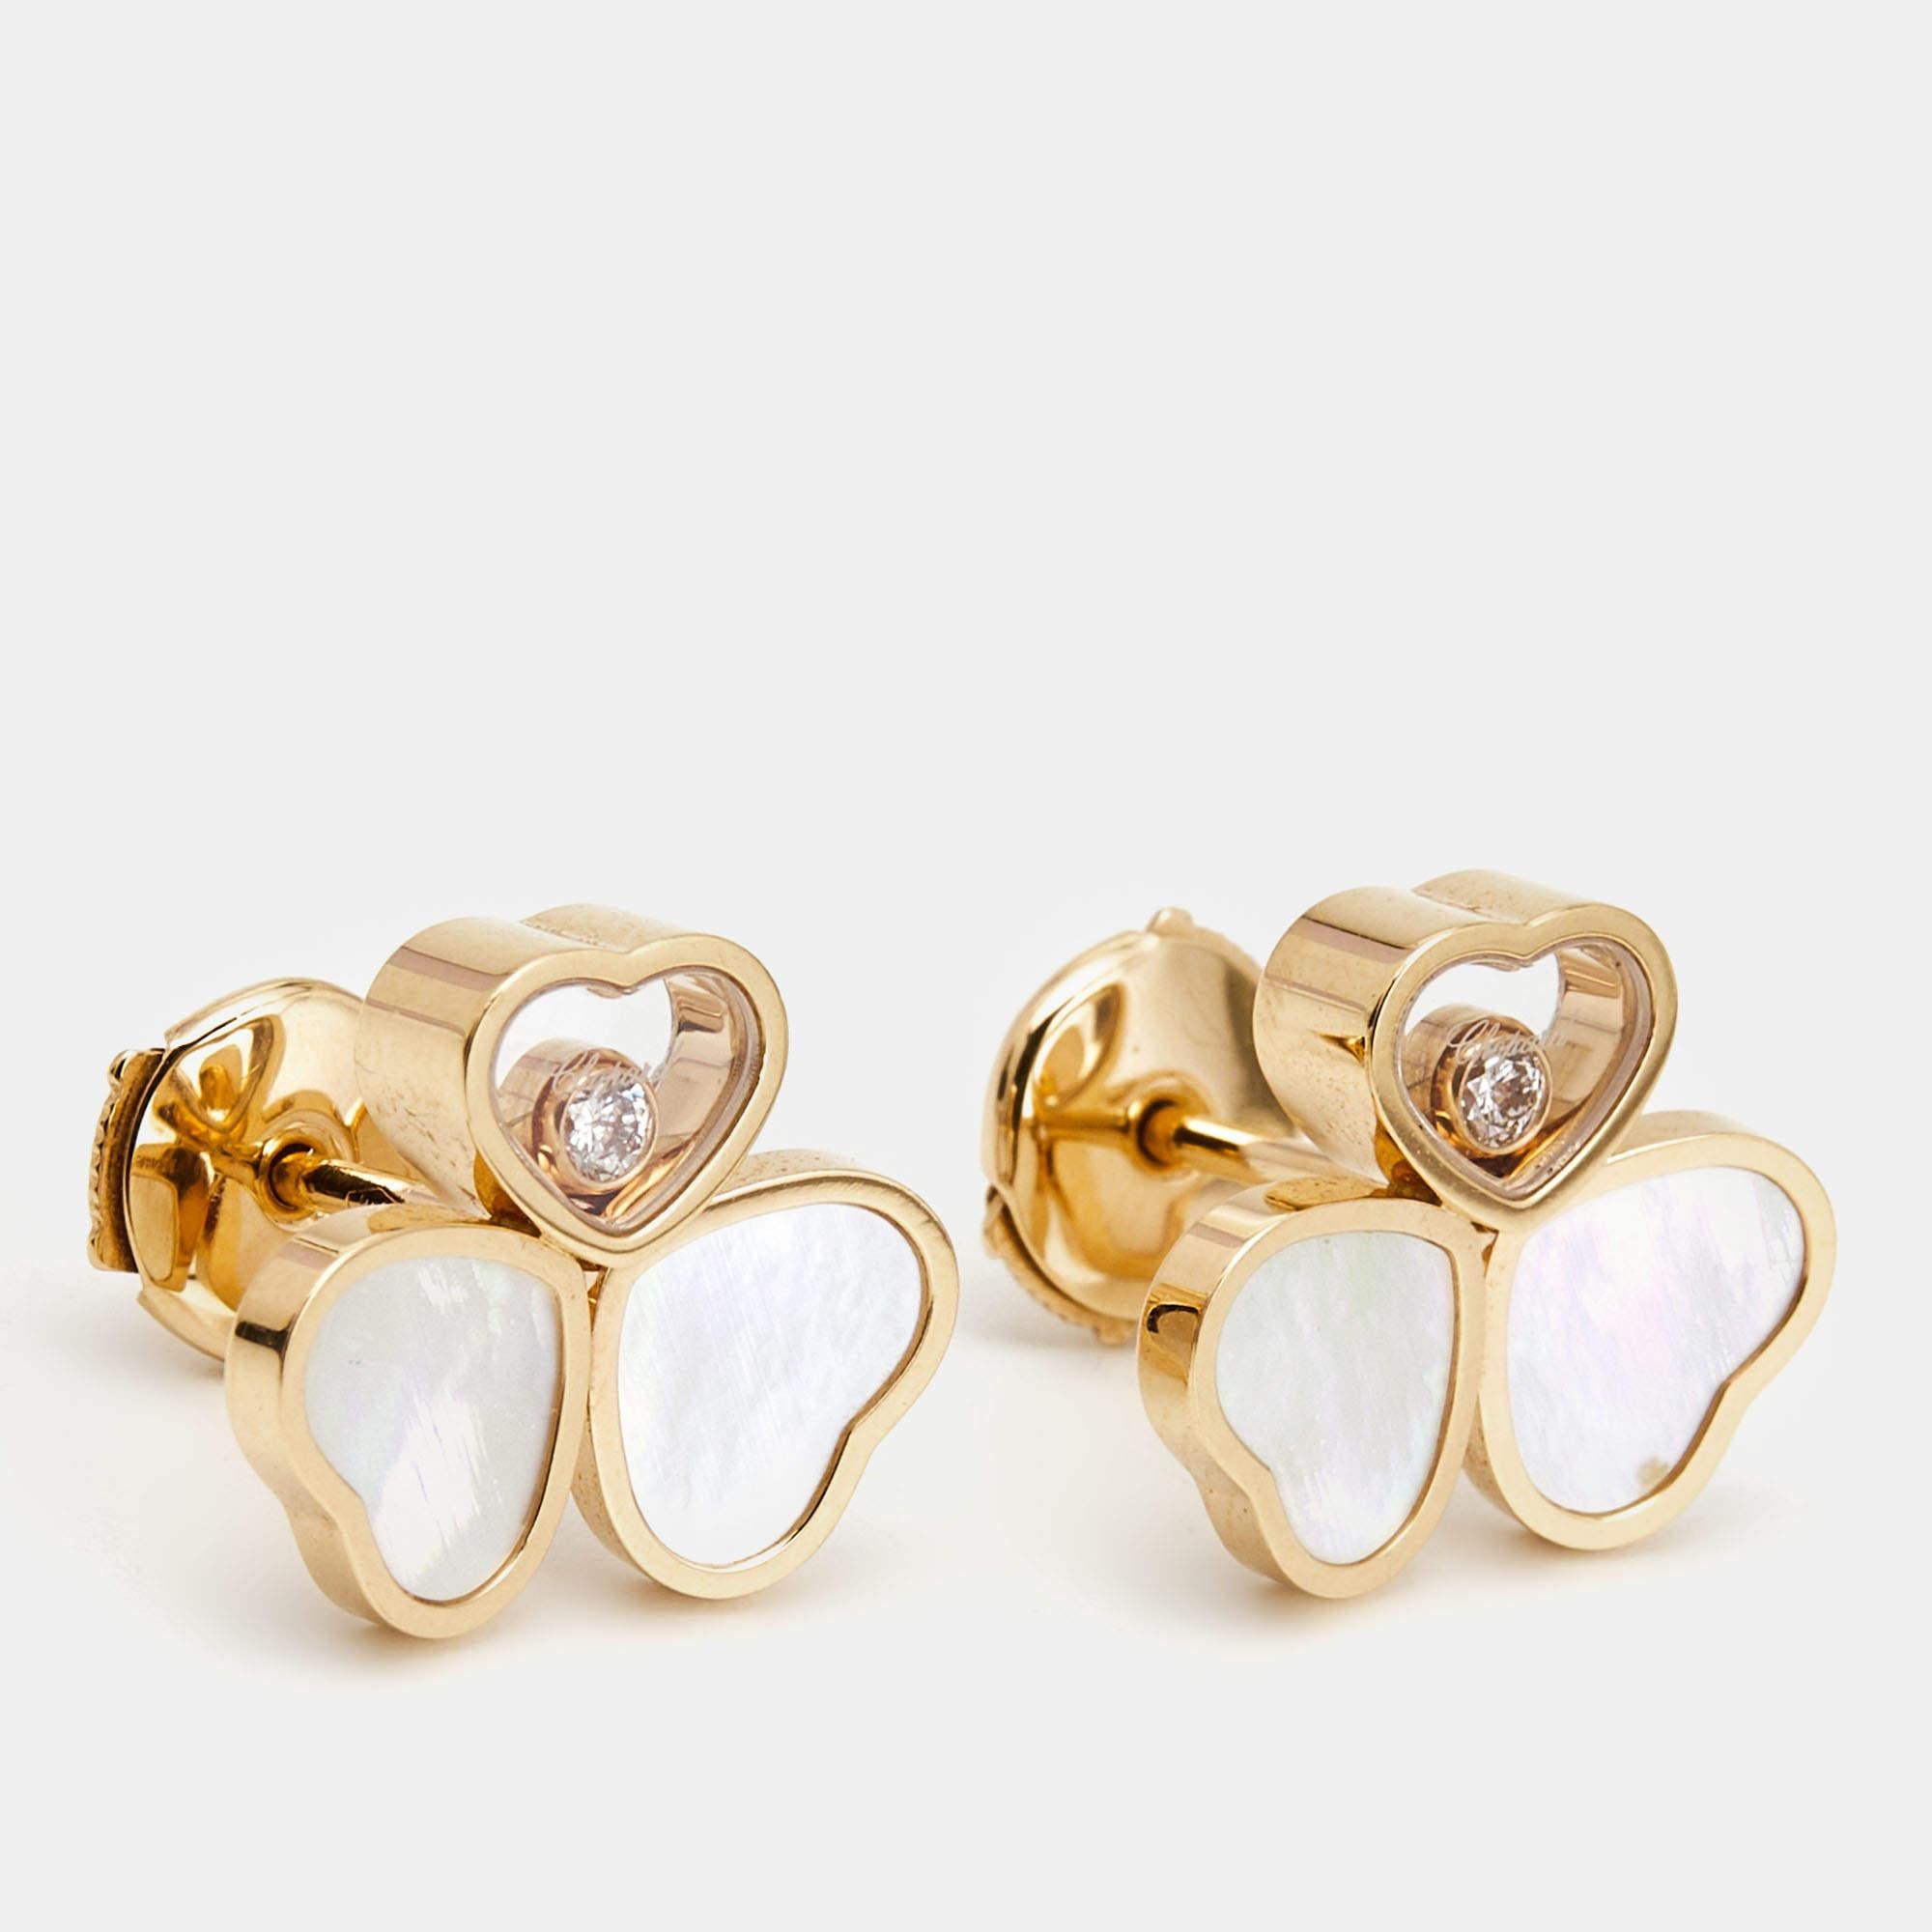 Adorn yourself with the exquisite Chopard Happy Heart Wings earrings. Crafted from 18k rose gold, these delicate earrings feature graceful mother-of-pearl hearts adorned with floating diamonds. Effortlessly elegant, they exude timeless charm and